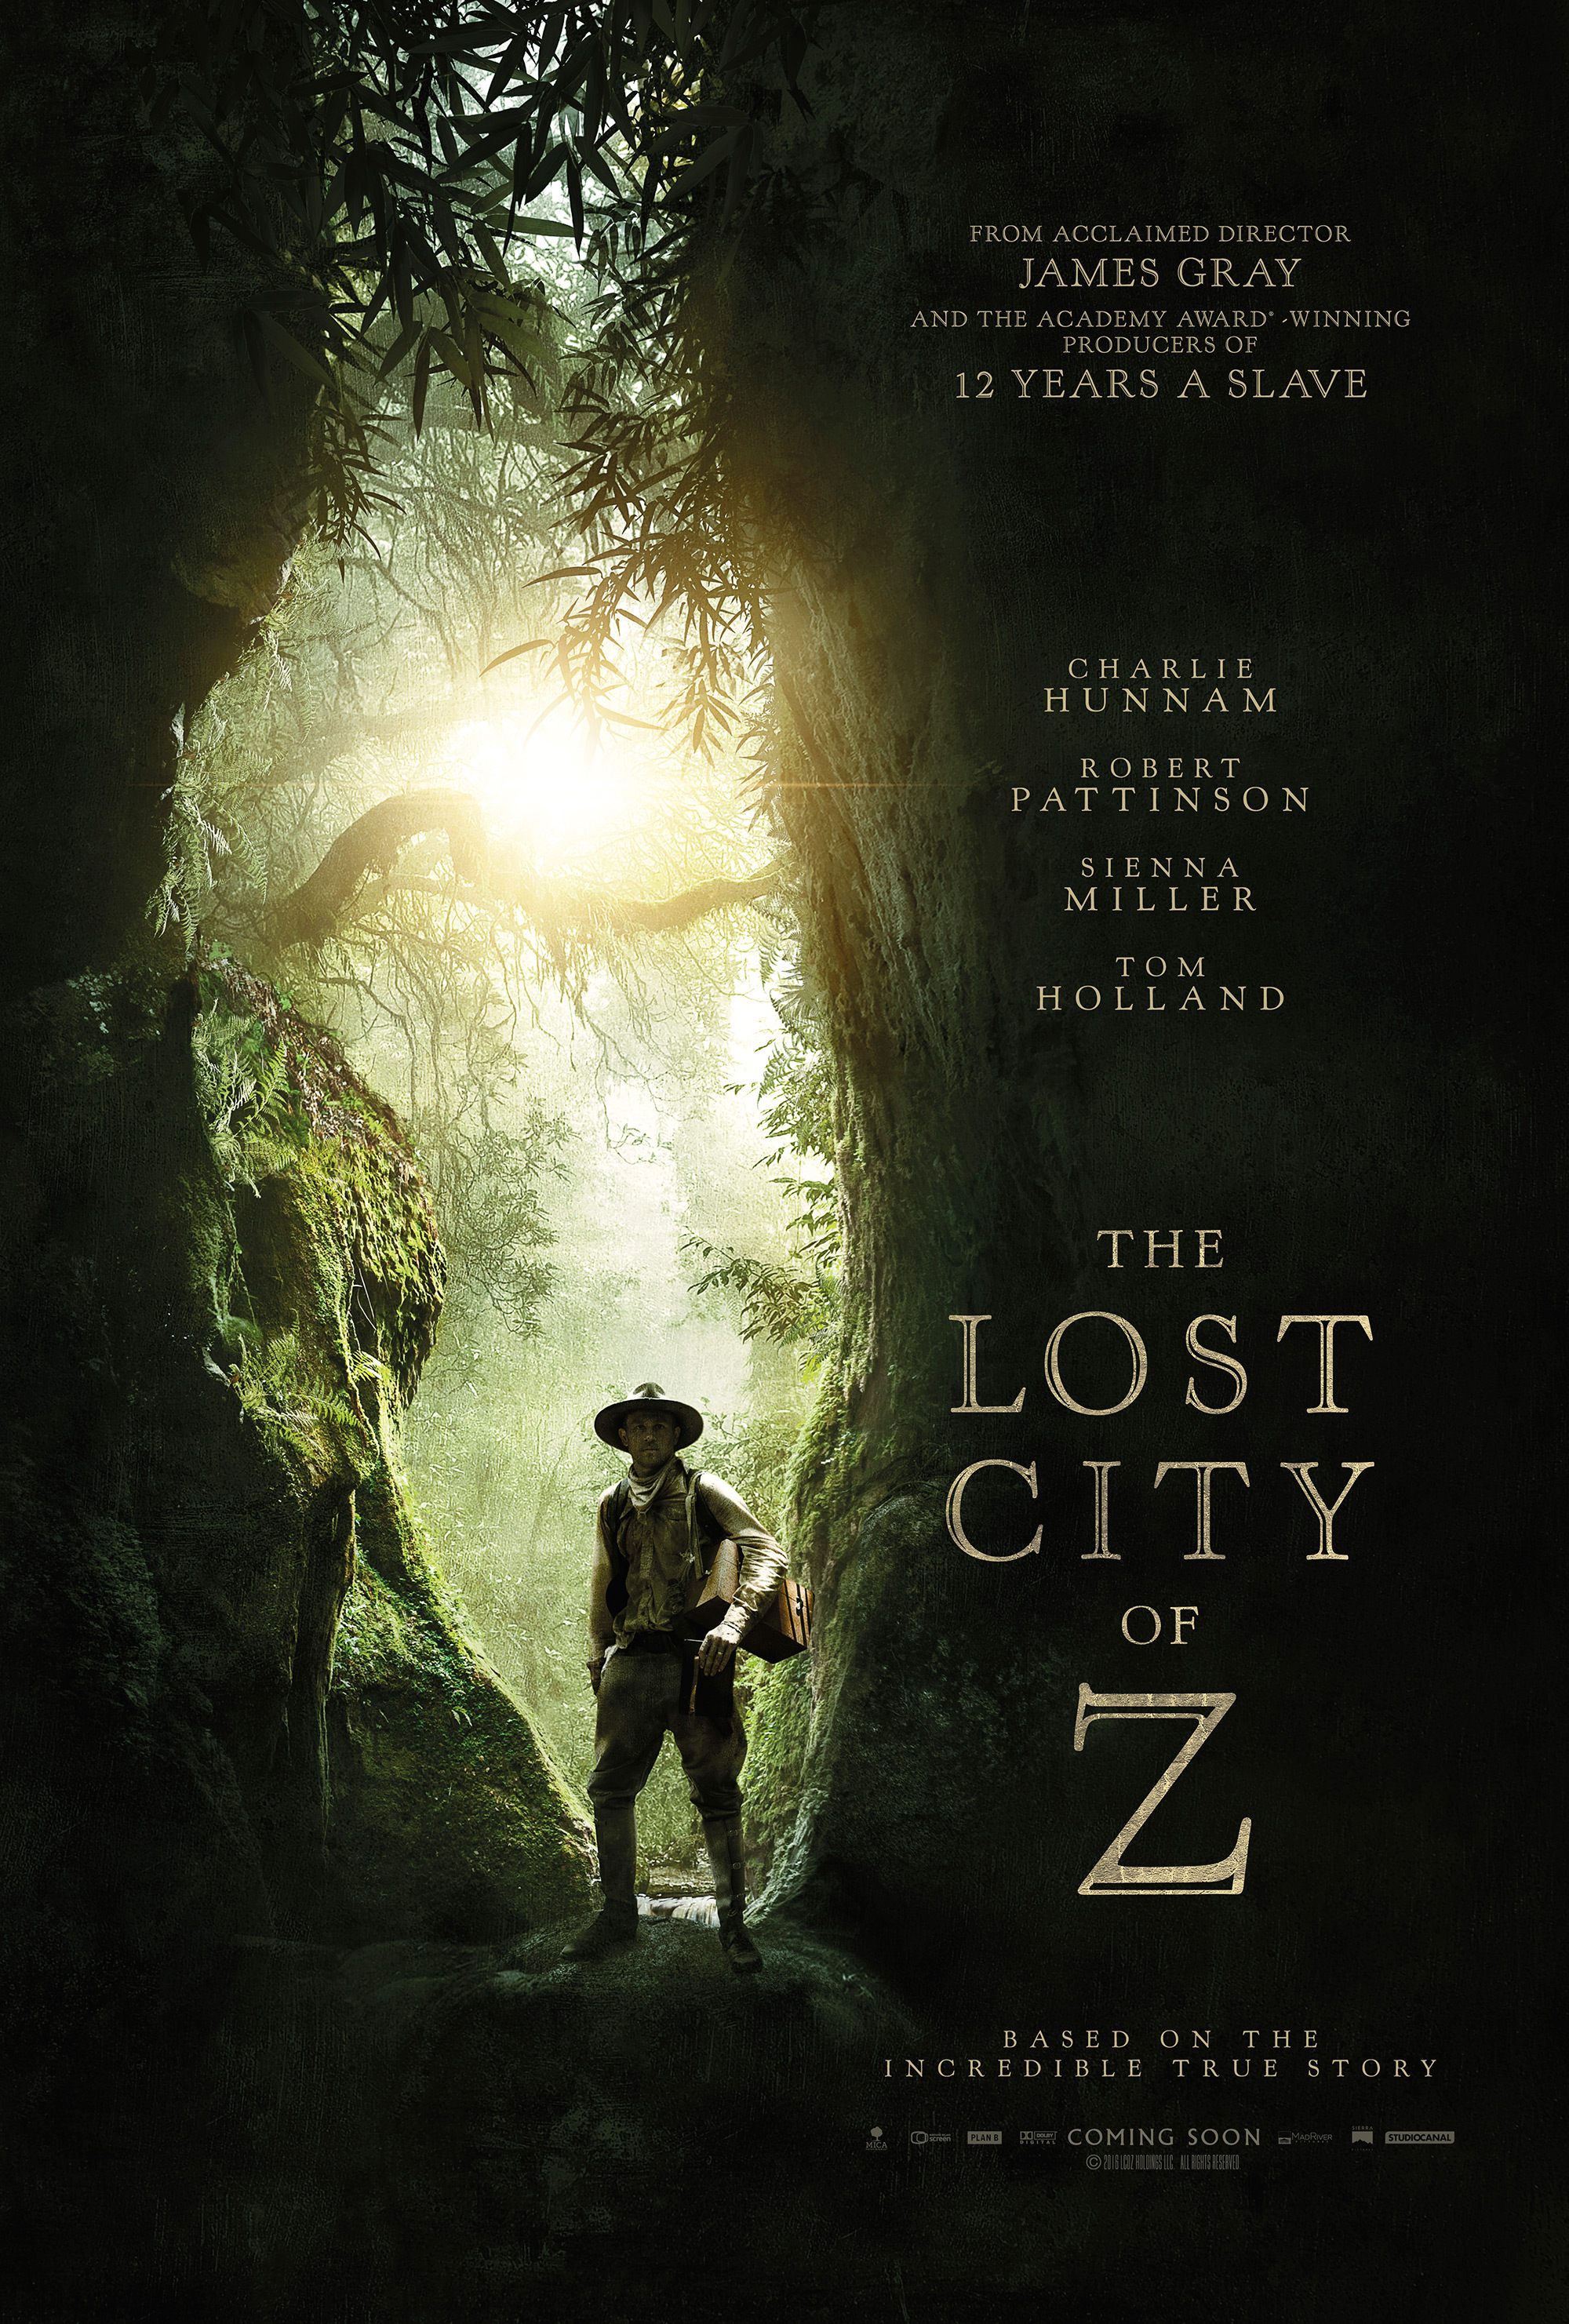 The Lost City of Z Artwork